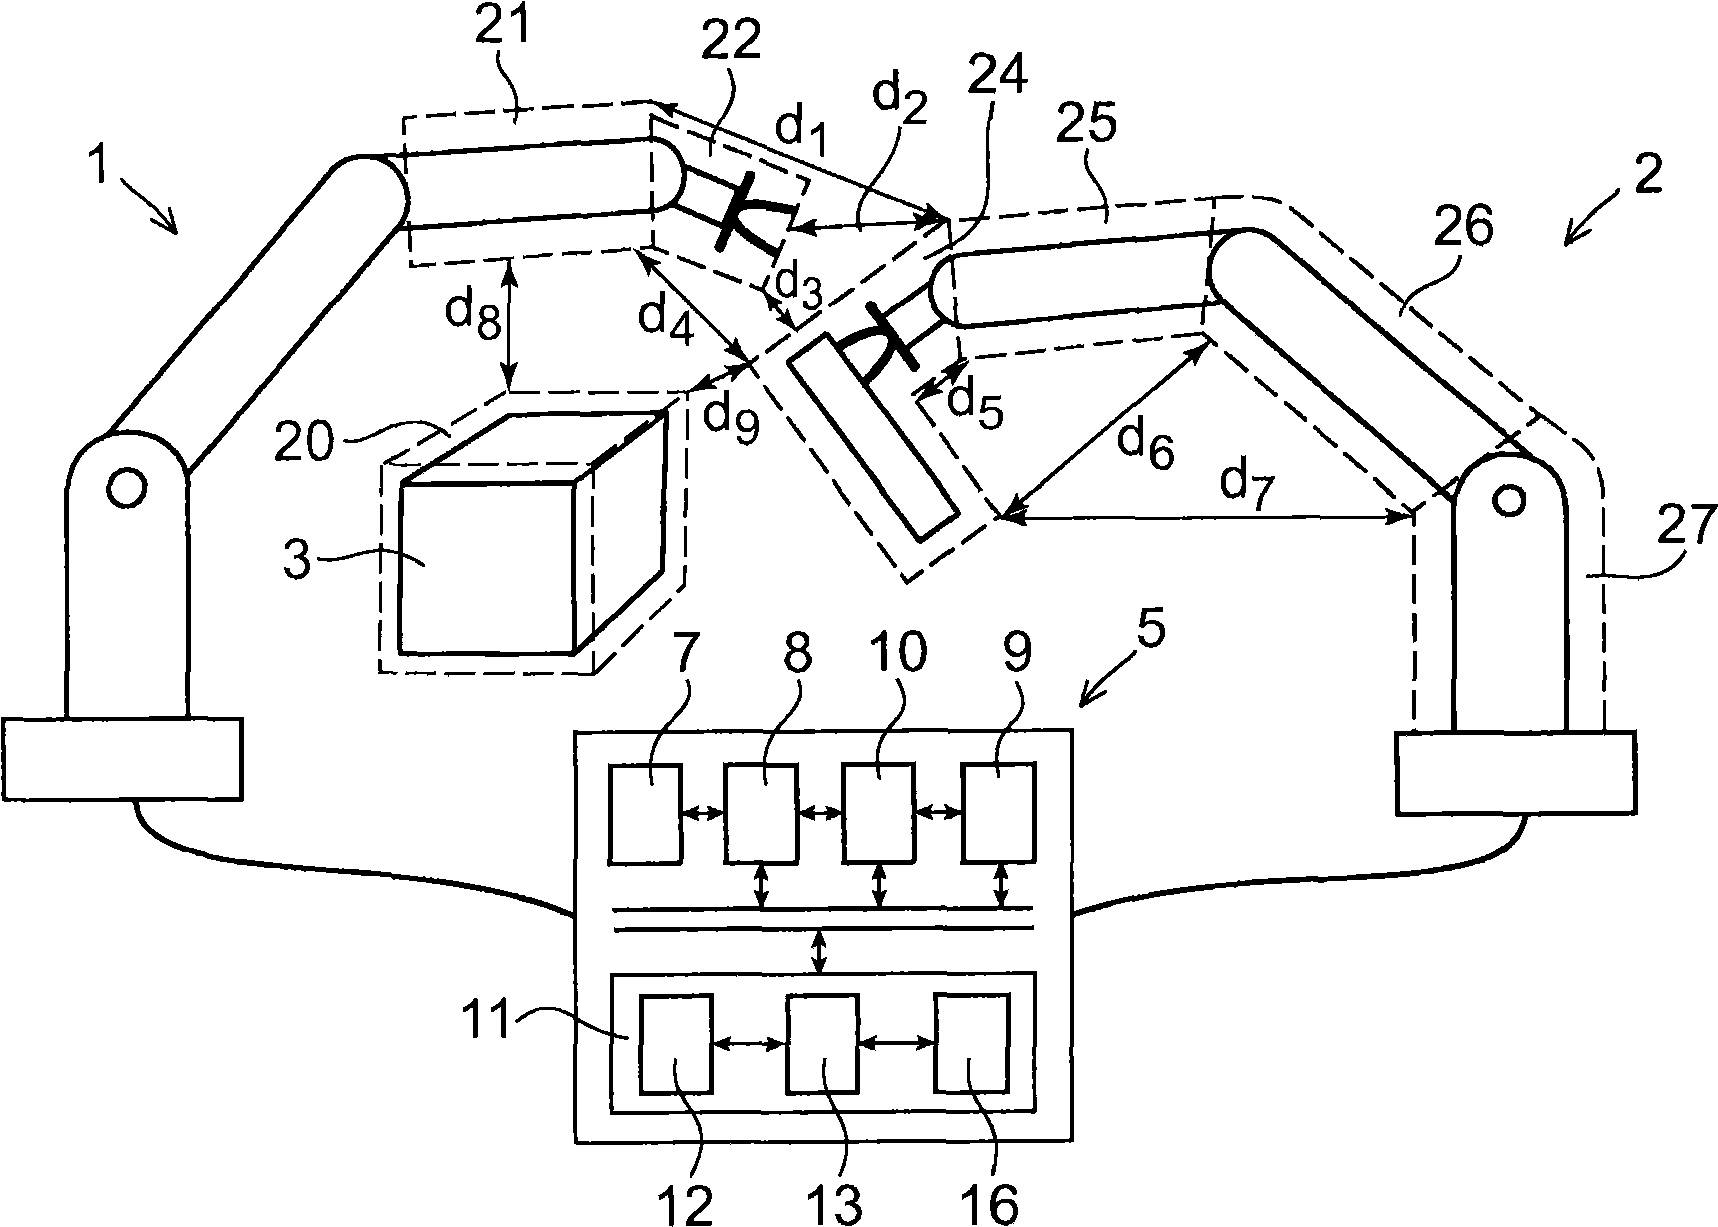 A method and device for avoiding collisions between an industrial robot and an object